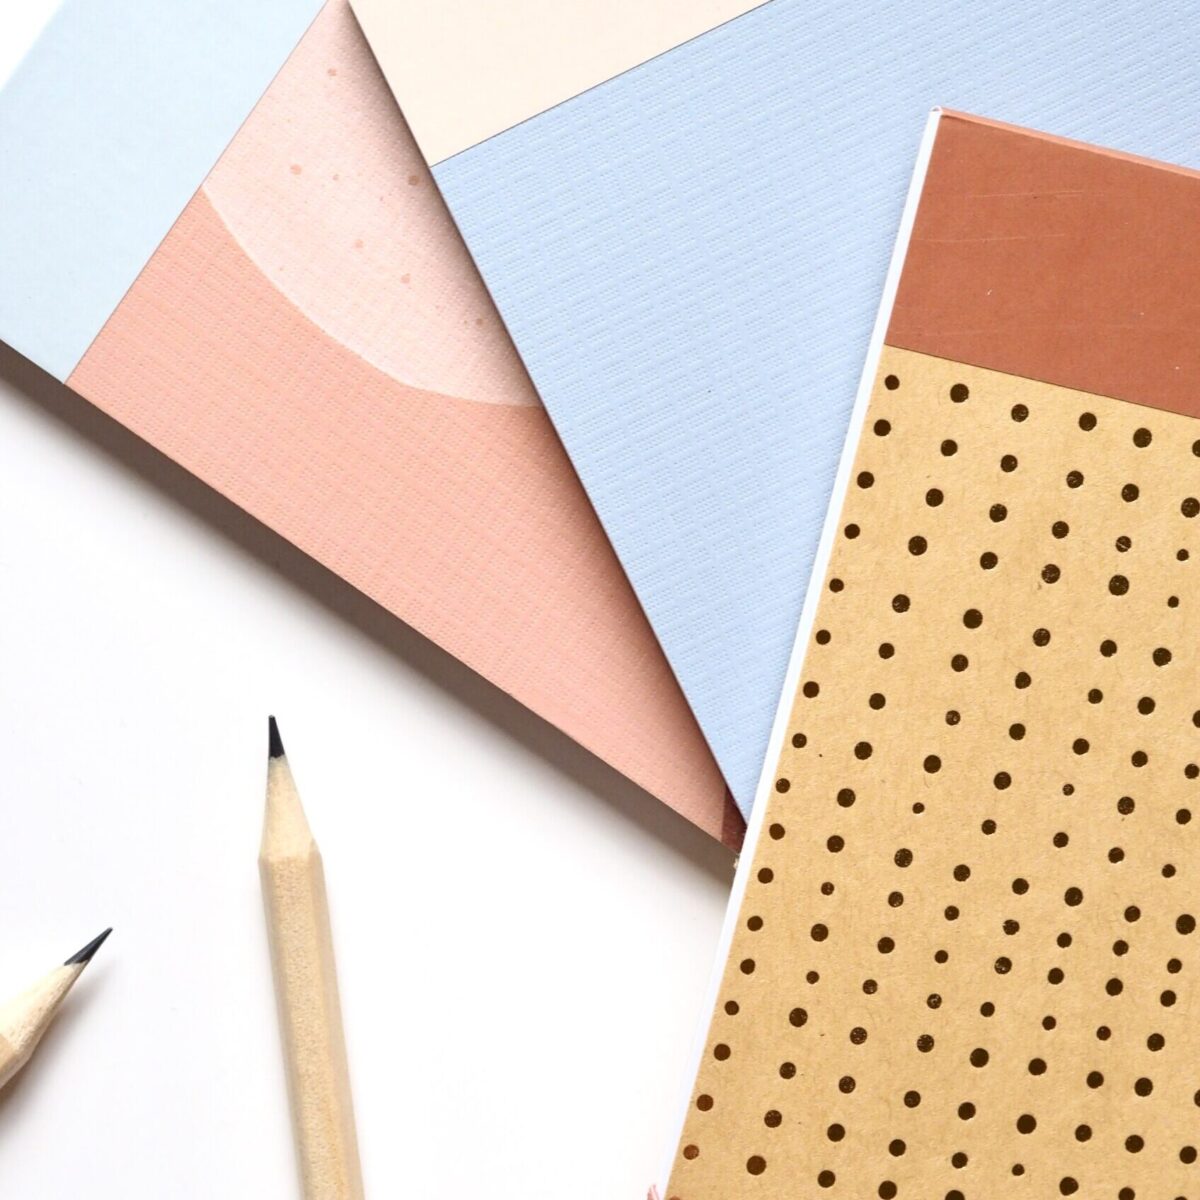 Two pencils placed next to a dotted journal with a colorful pastel background